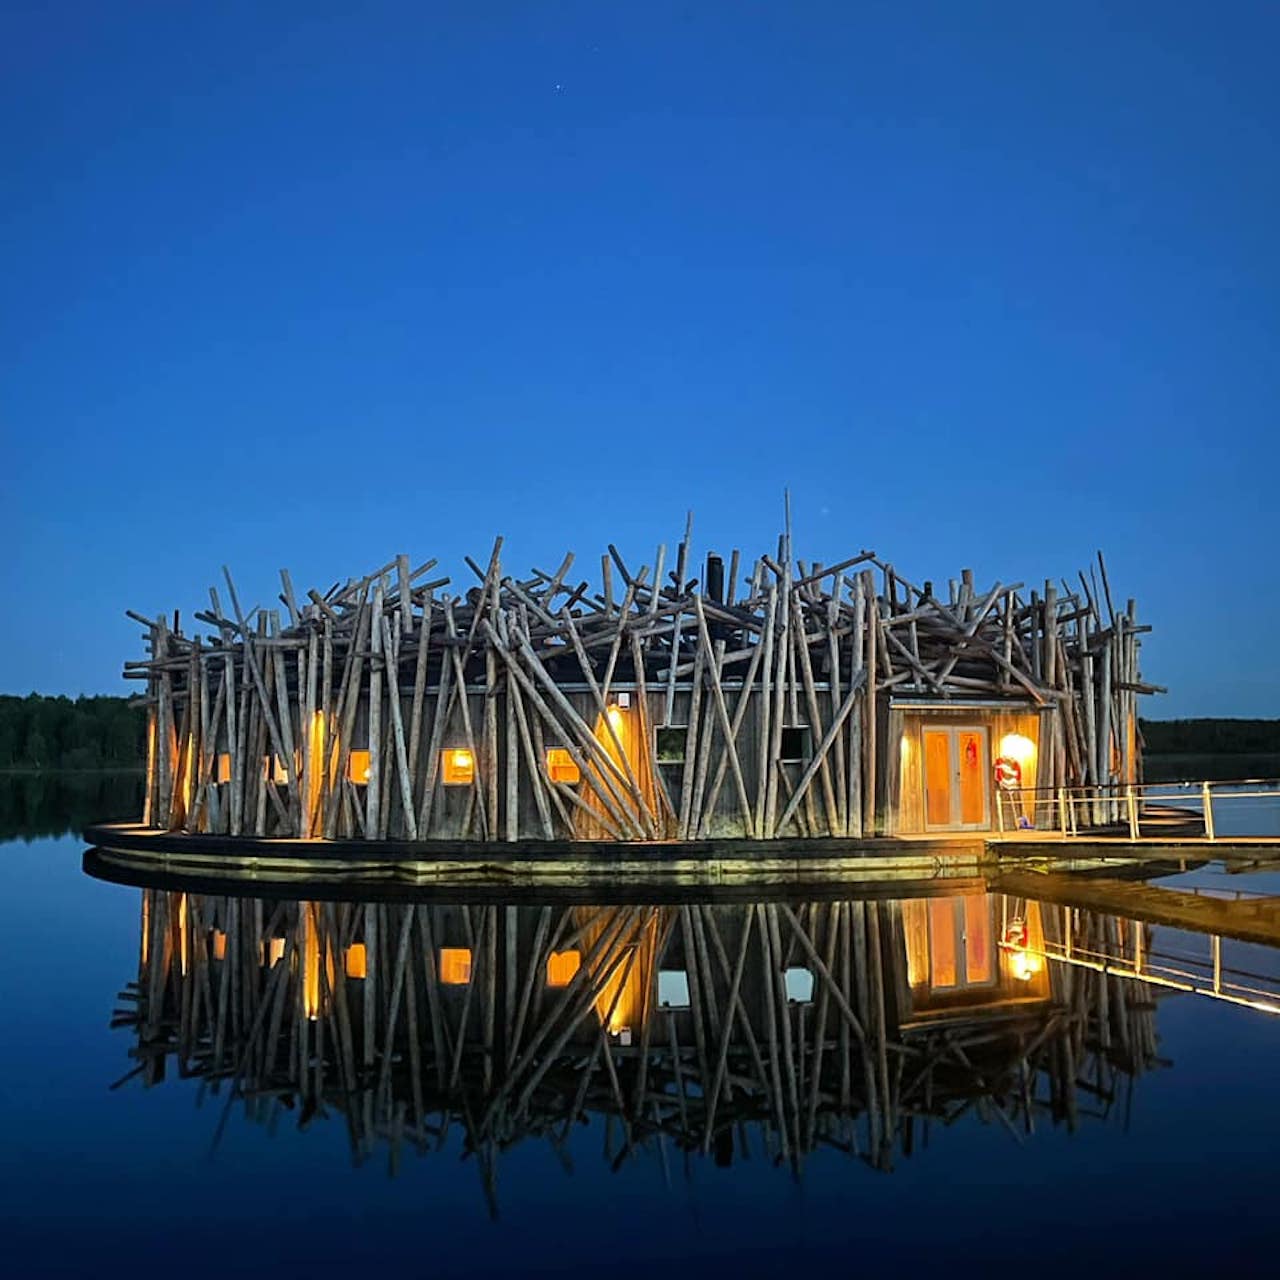 This summer, visitors to Lapland can feel like intrepid explorers tracking some of Scandinavia’s most endangered species in their own habitat, with Animal Encounter, a new wildlife adventure from Off the Map Travel.